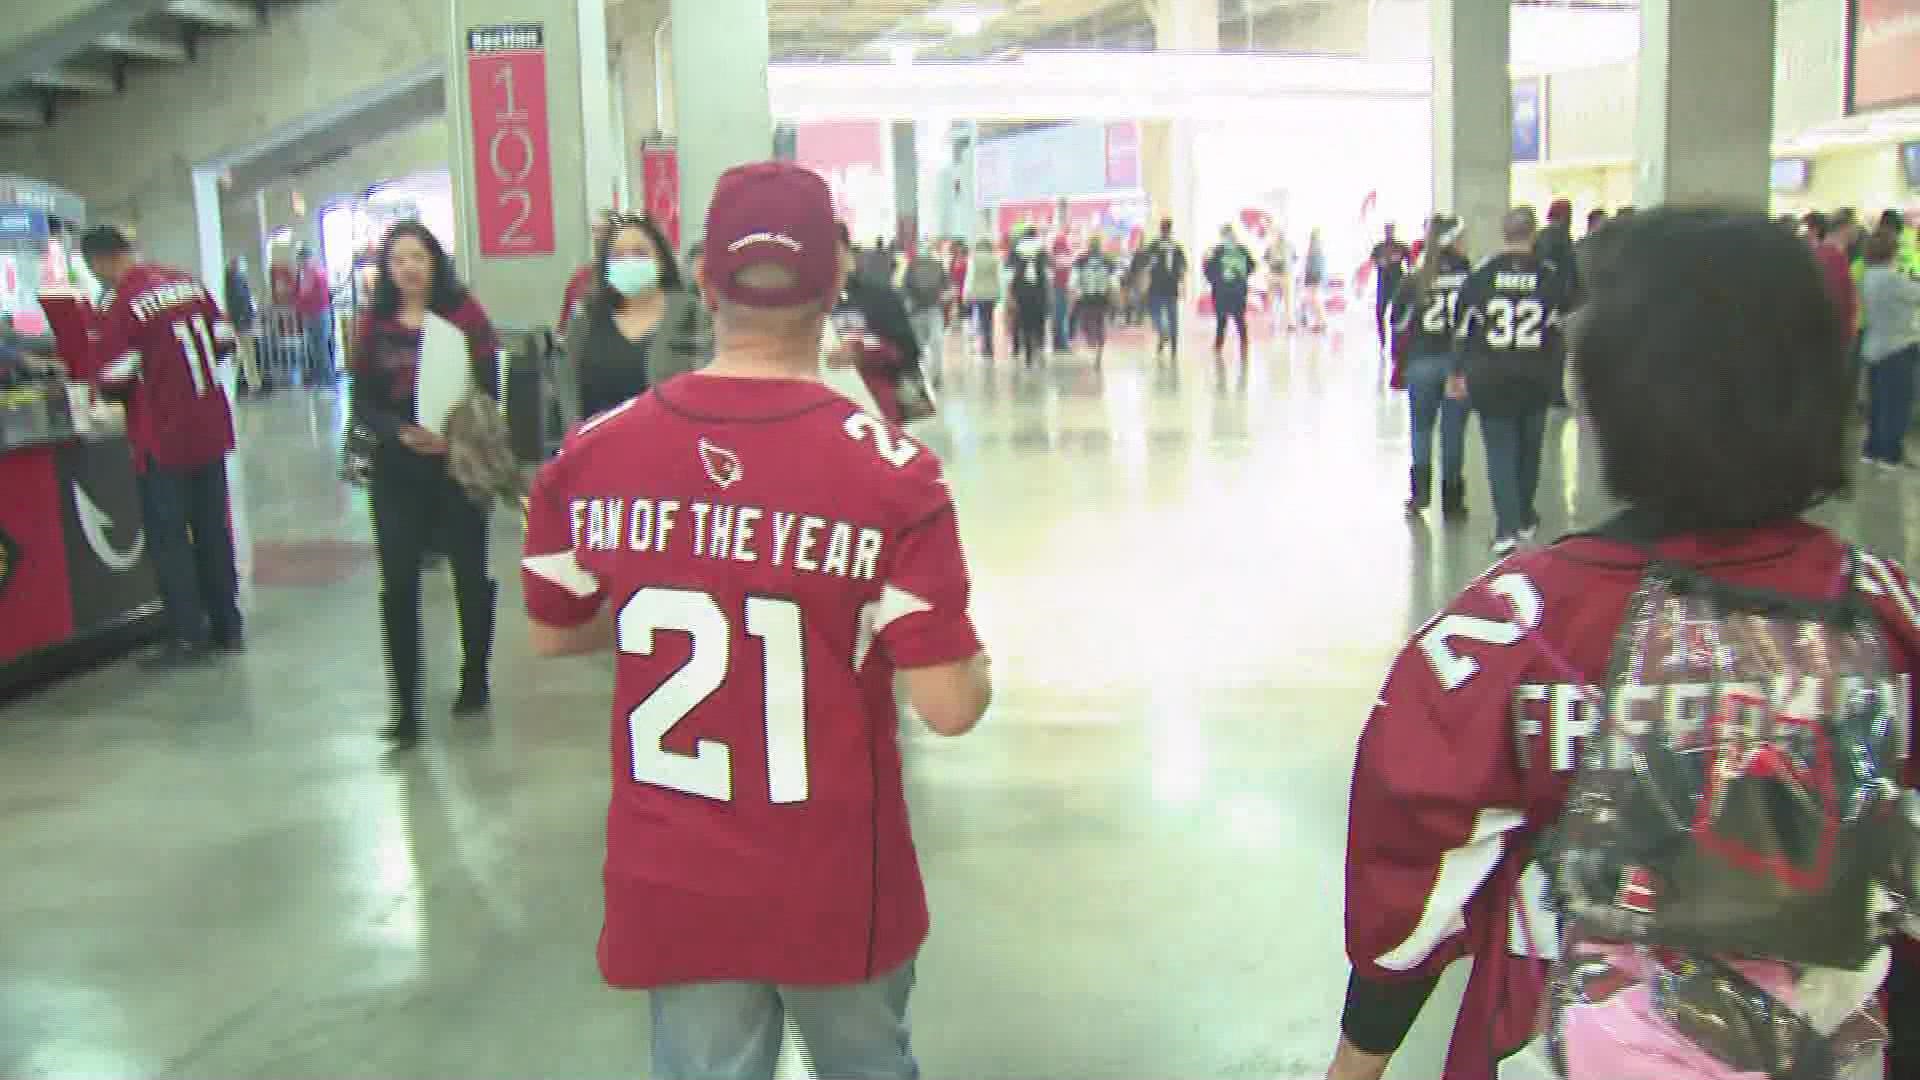 Arizona Cardinals name their 2021 Fan of the Year